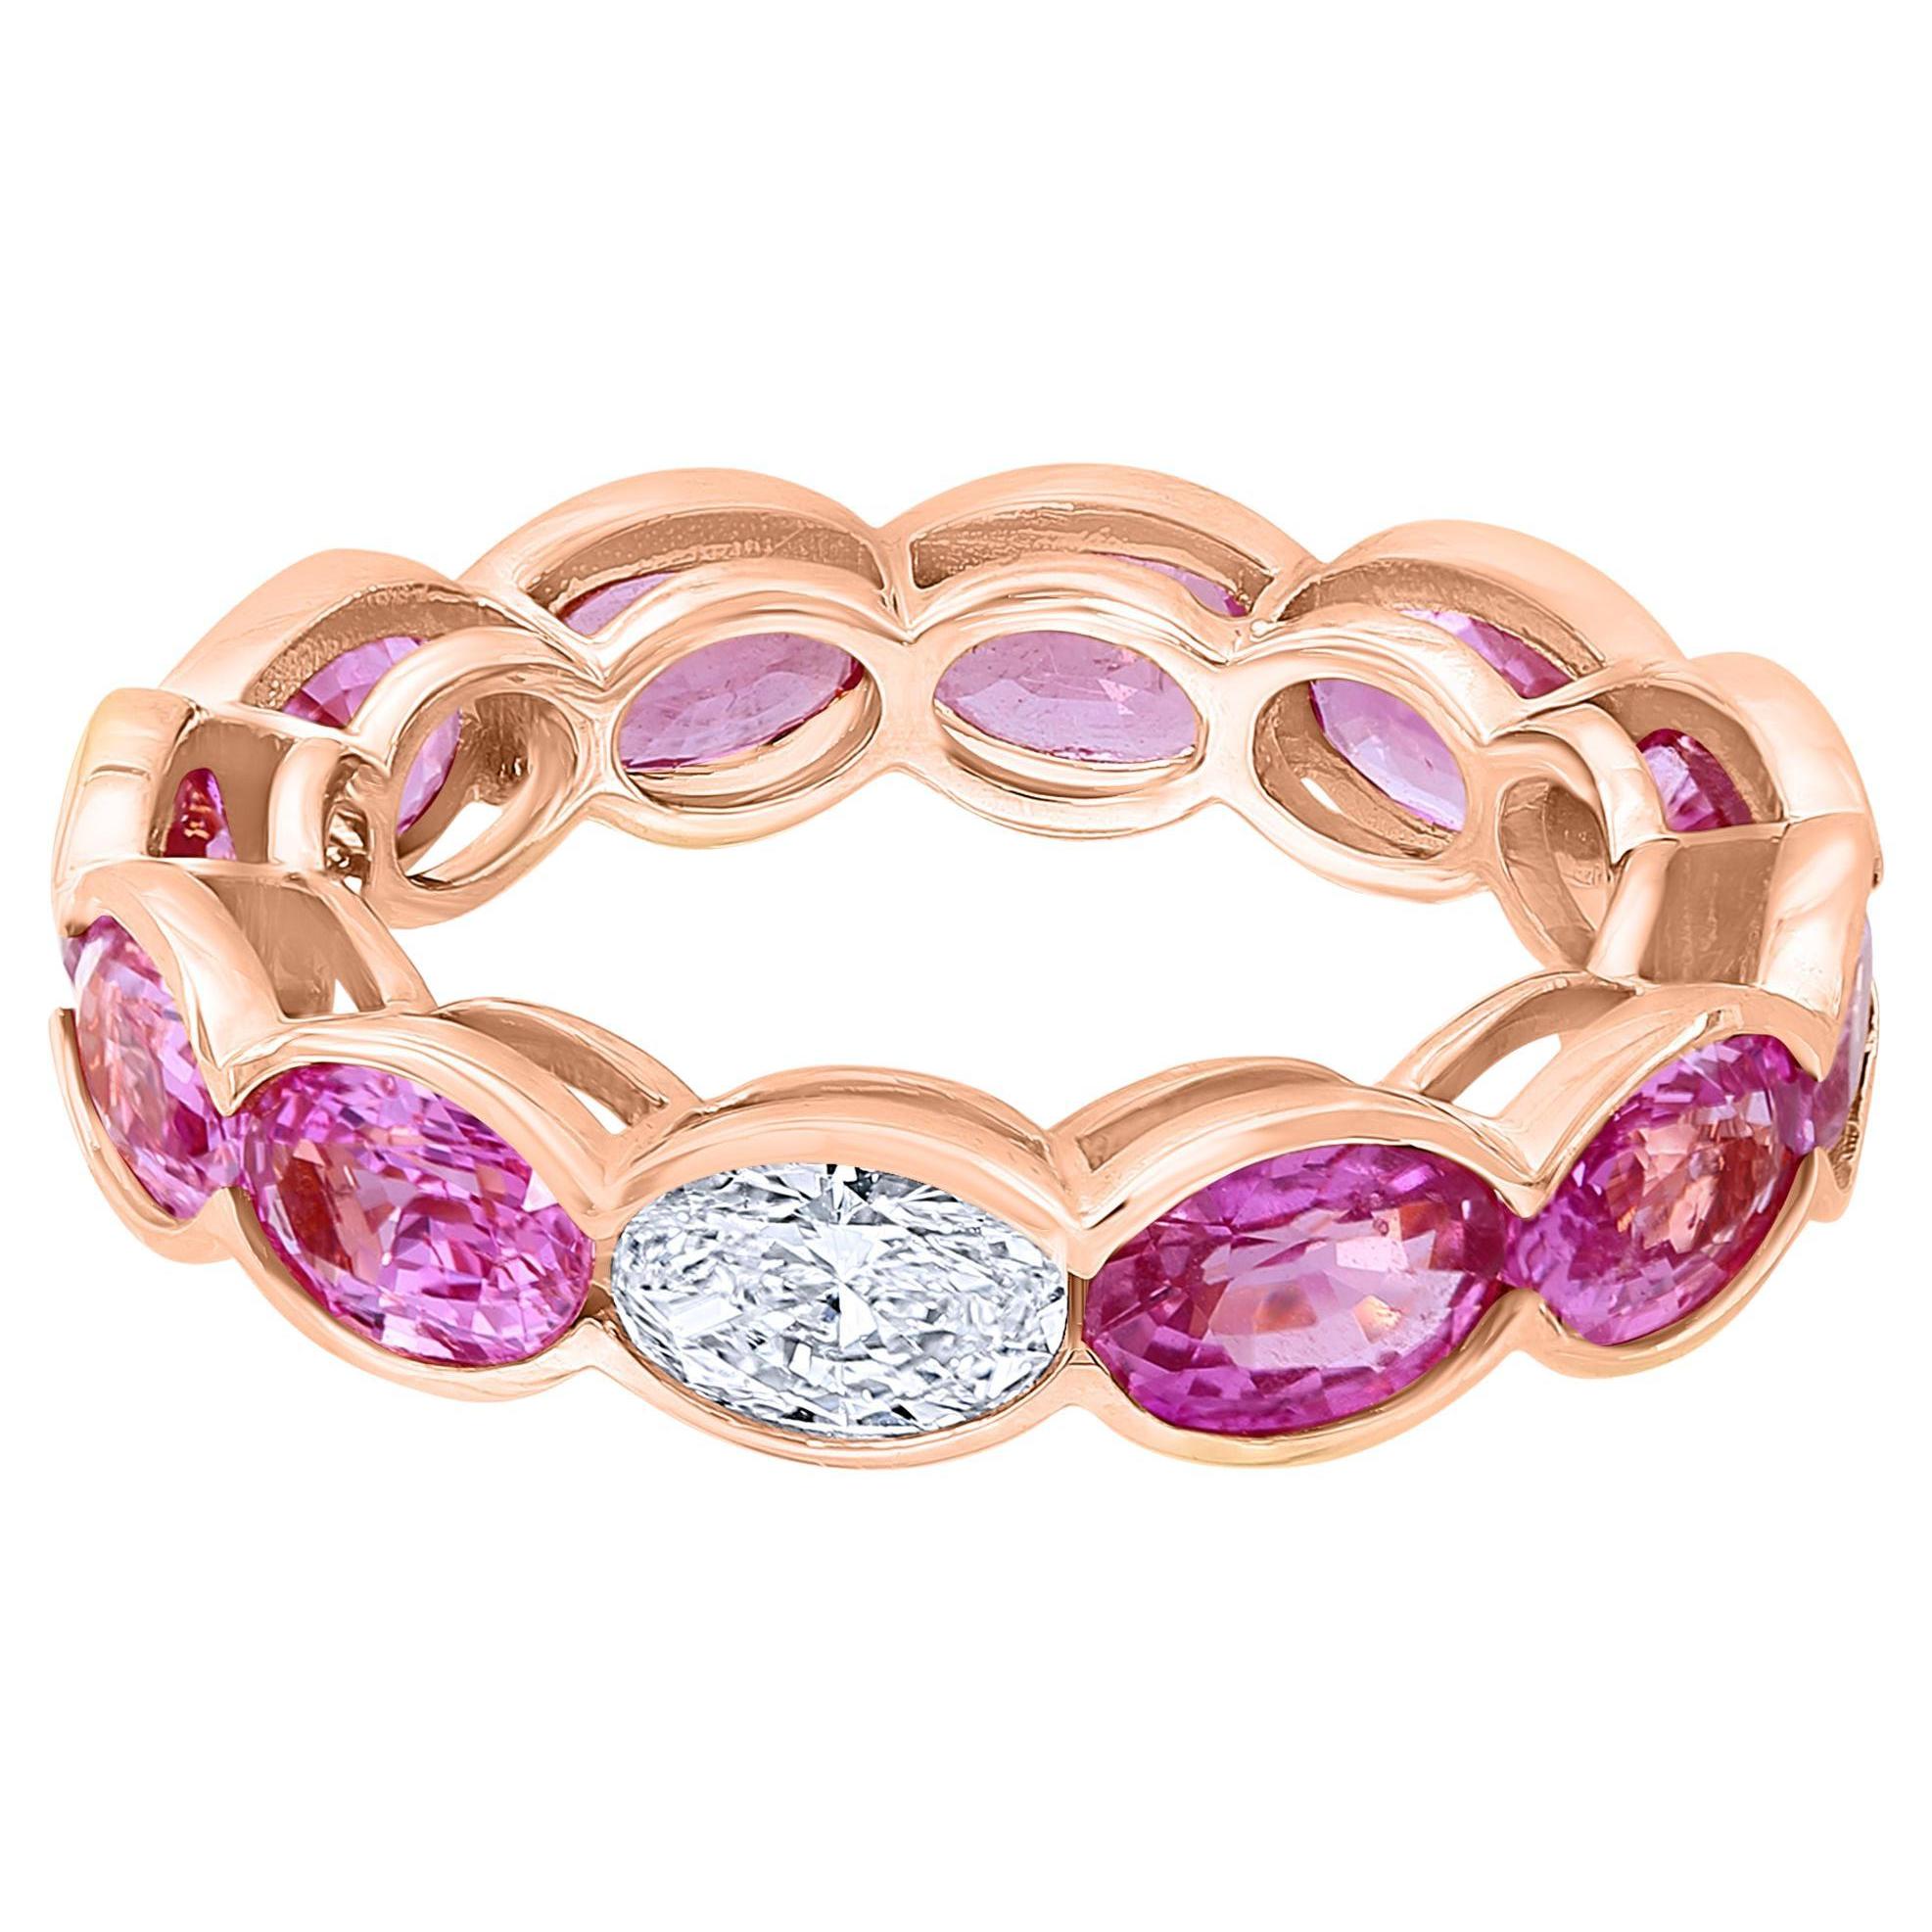 Beautiful and Forward Eternity Band.
Ring features 11 perfectly matched Pink Sapphires weighing 5.97 Carats and
1 Oval Cut Diamond weighing 0.36 Carats.
Set in 18 Karat Rose Gold.
Size 6
Can be worn Diamond Side up or down.